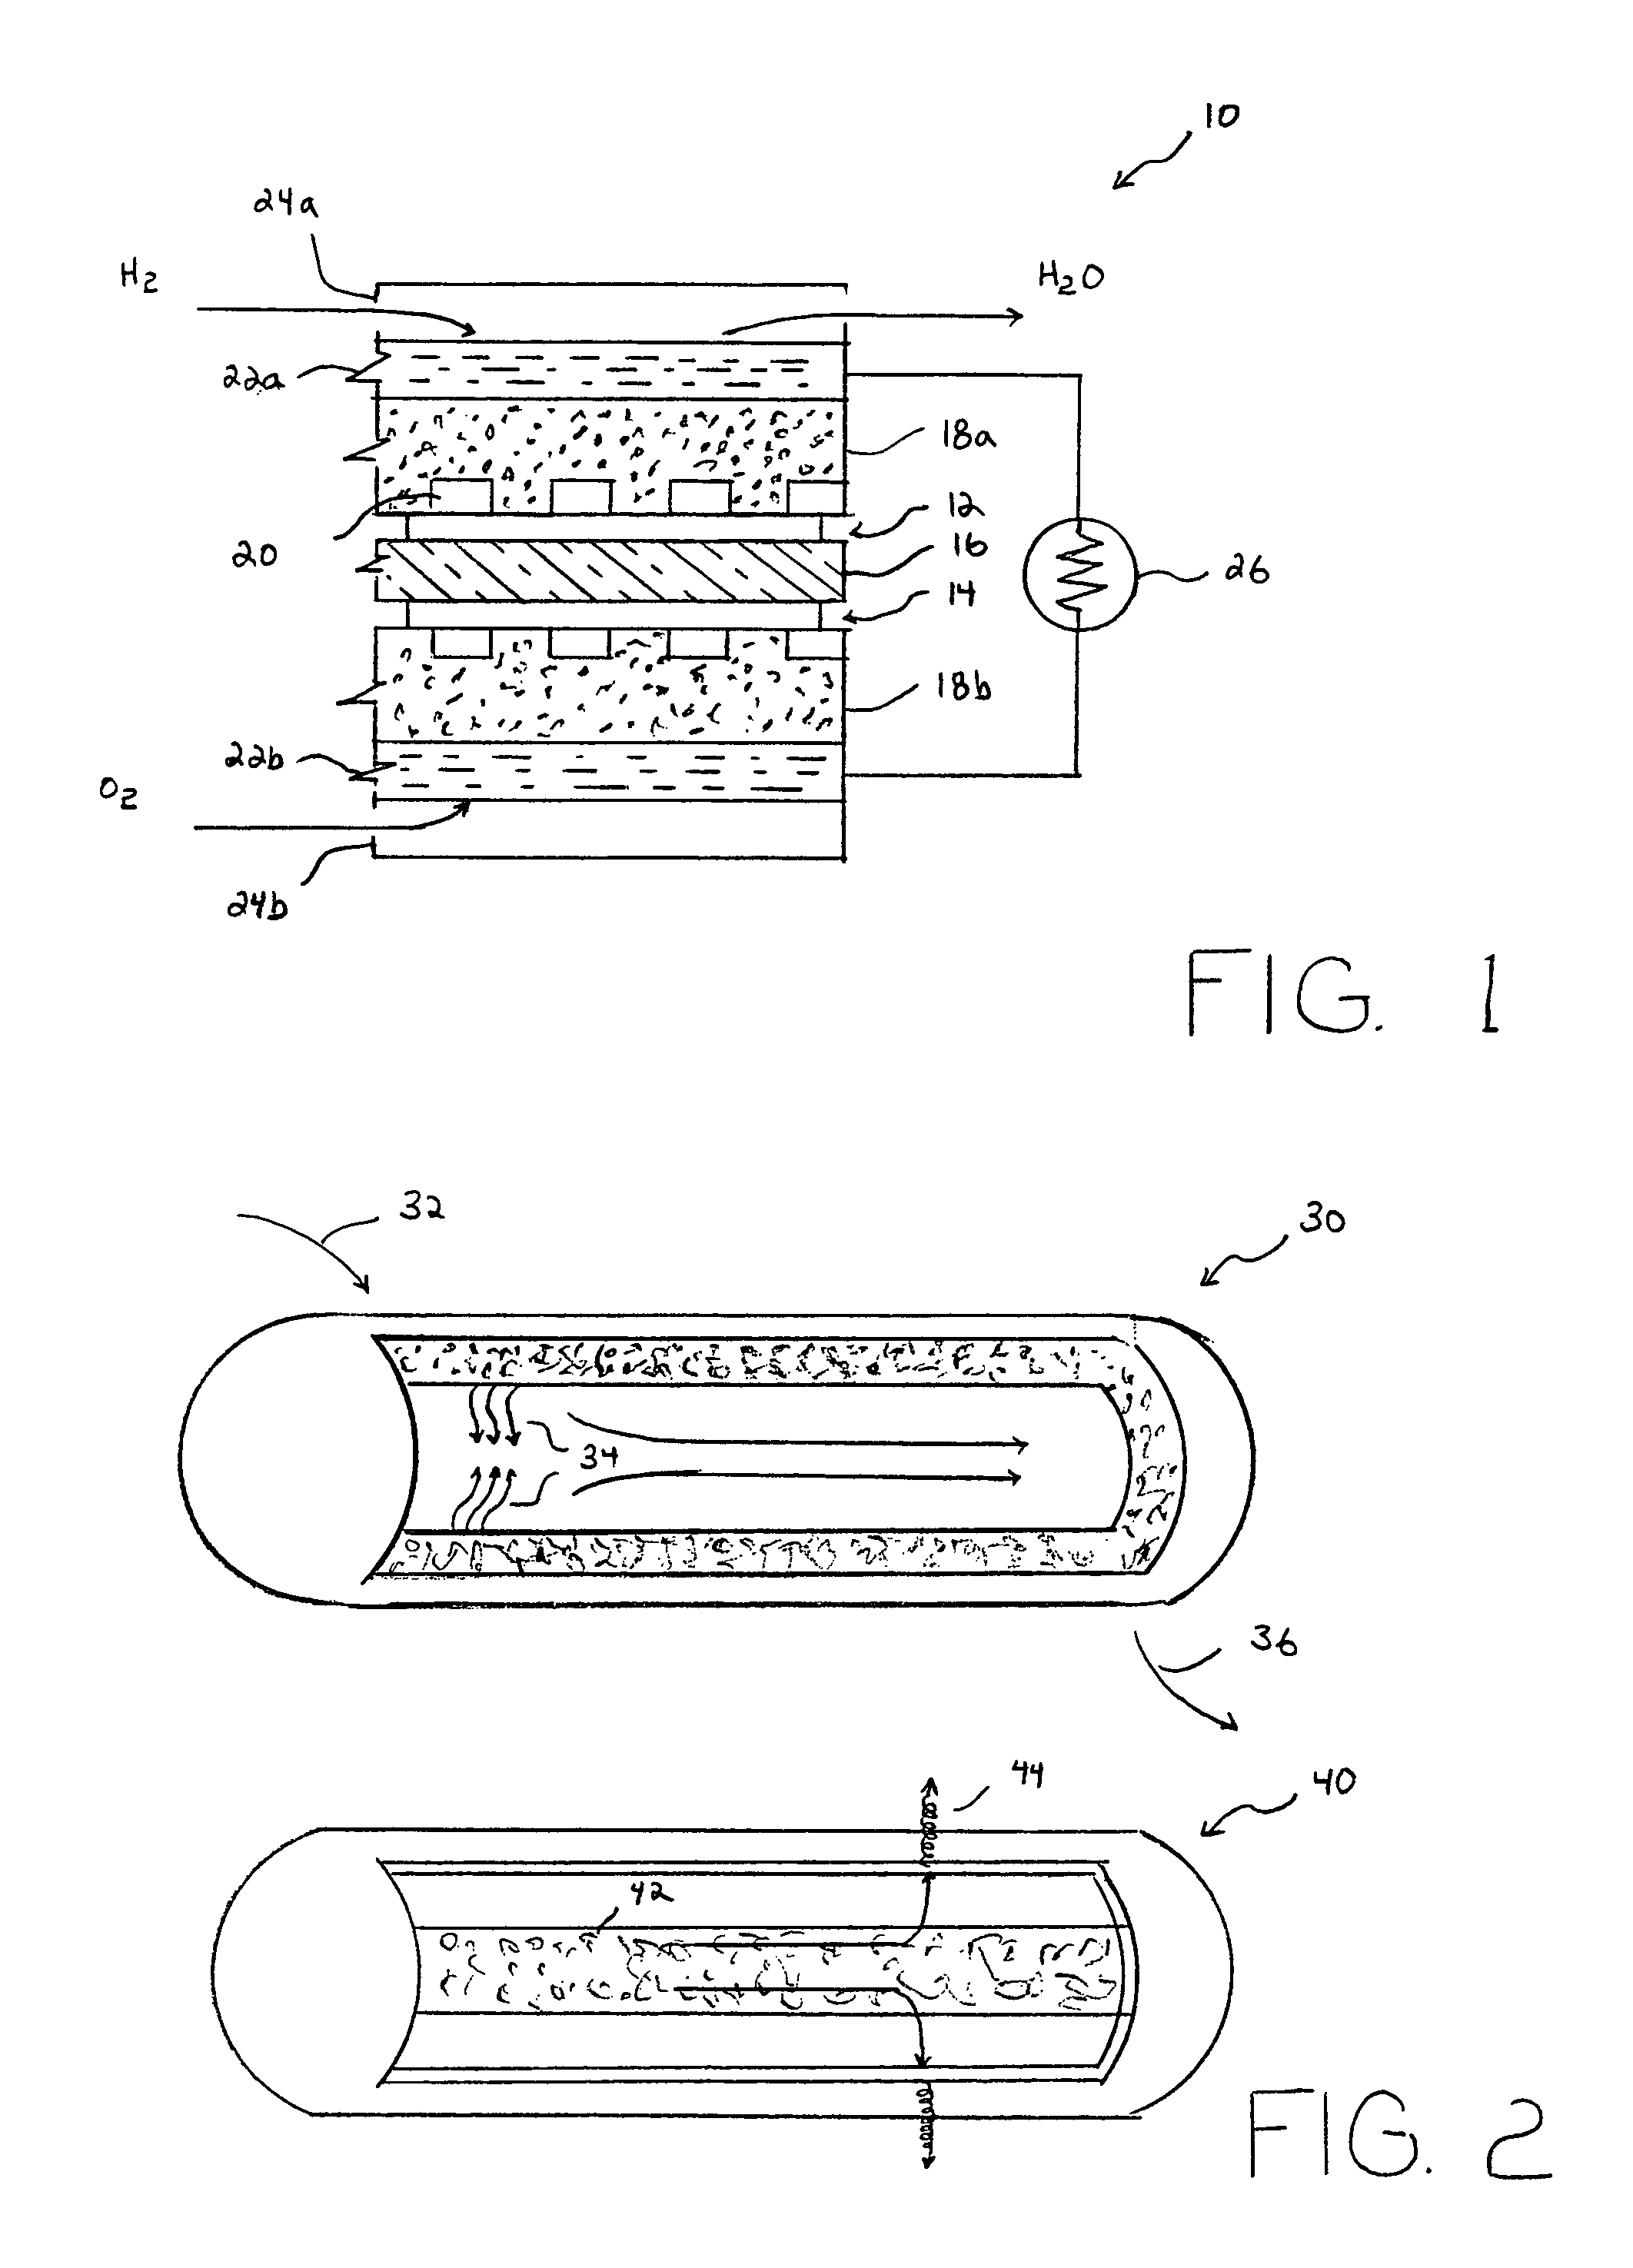 Fuel cell having an integrated, porous thermal exchange mechanism